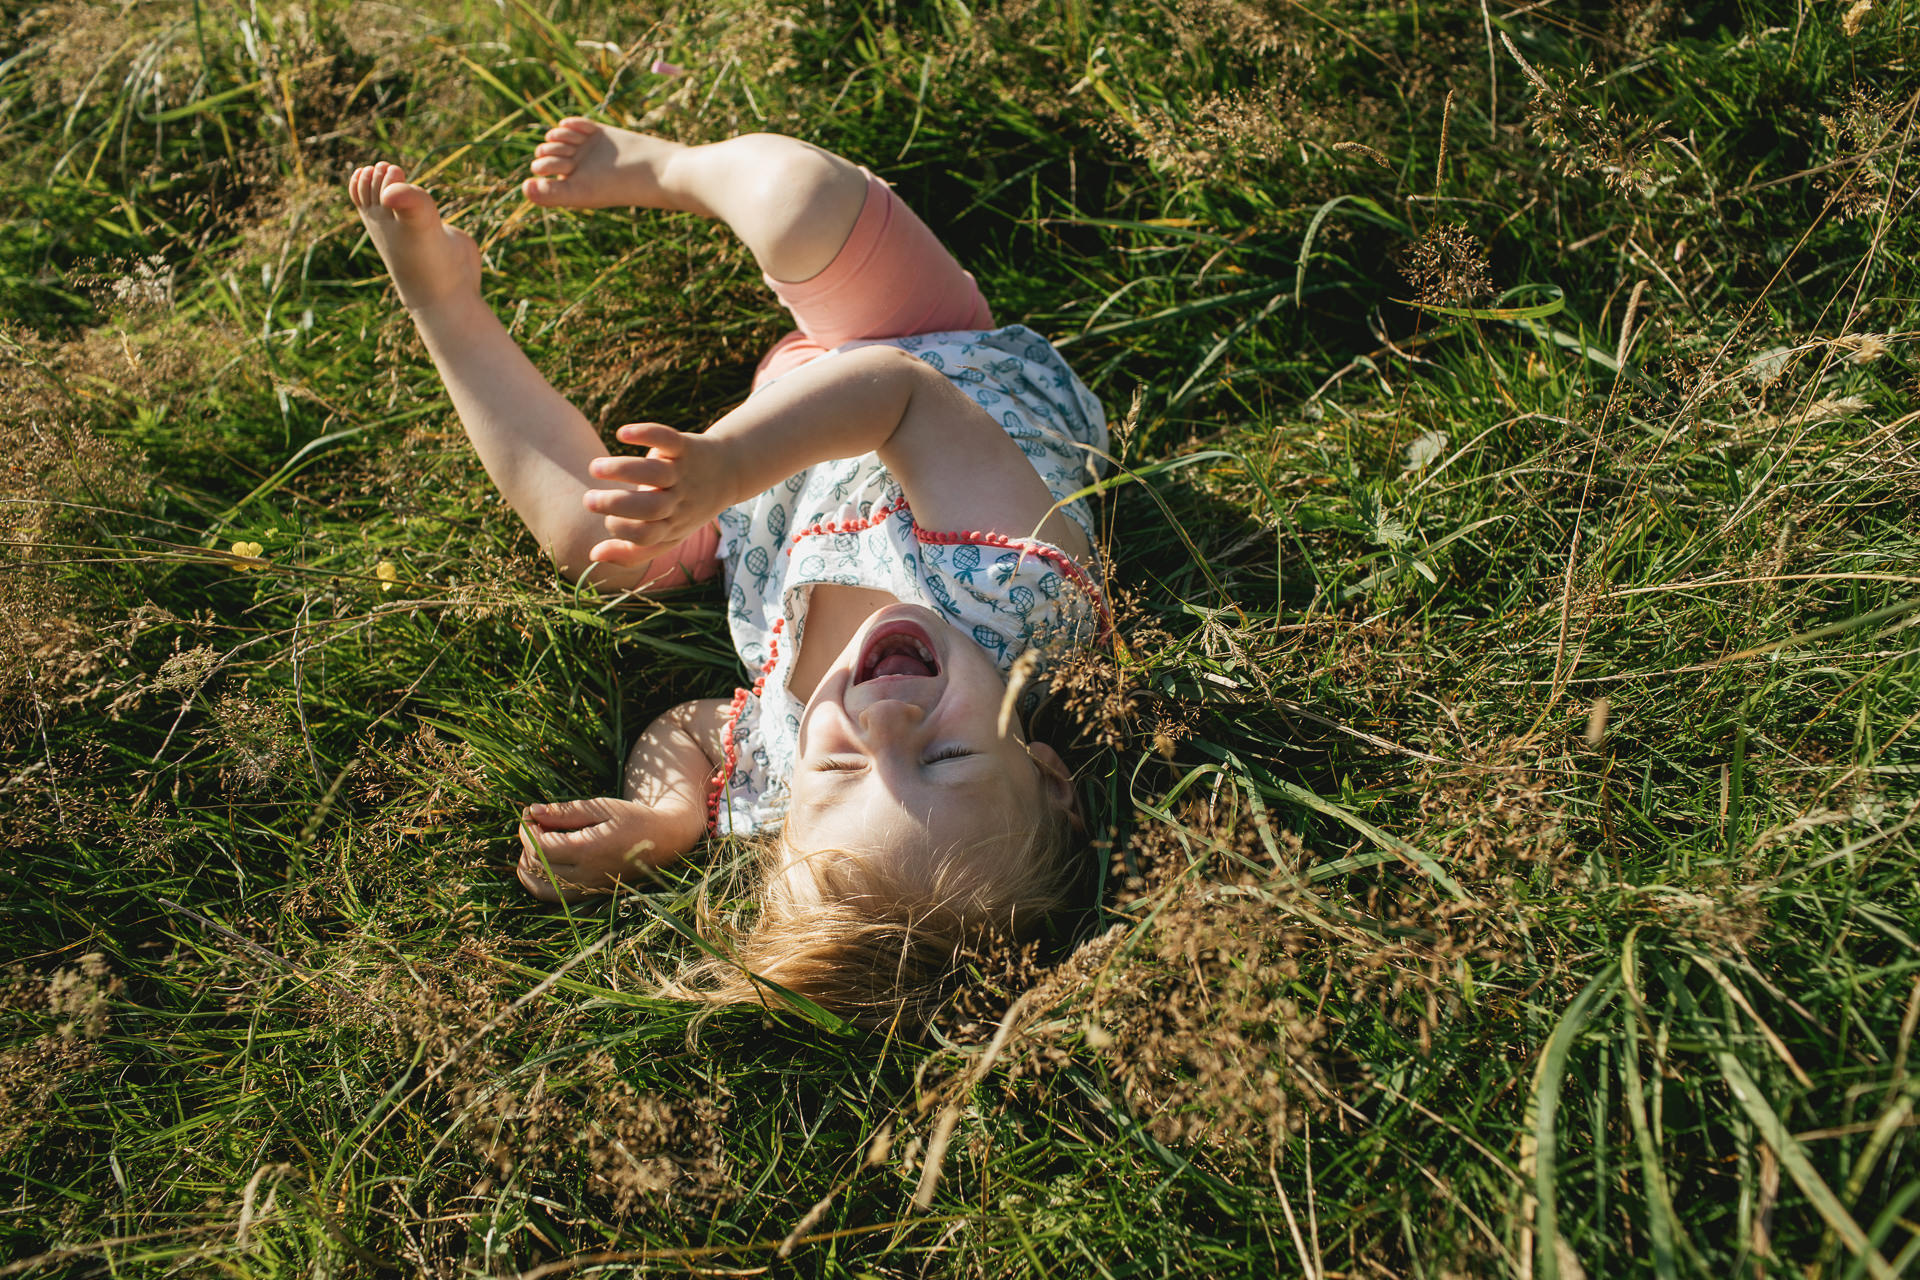 A young girl rolling in the grass and laughing